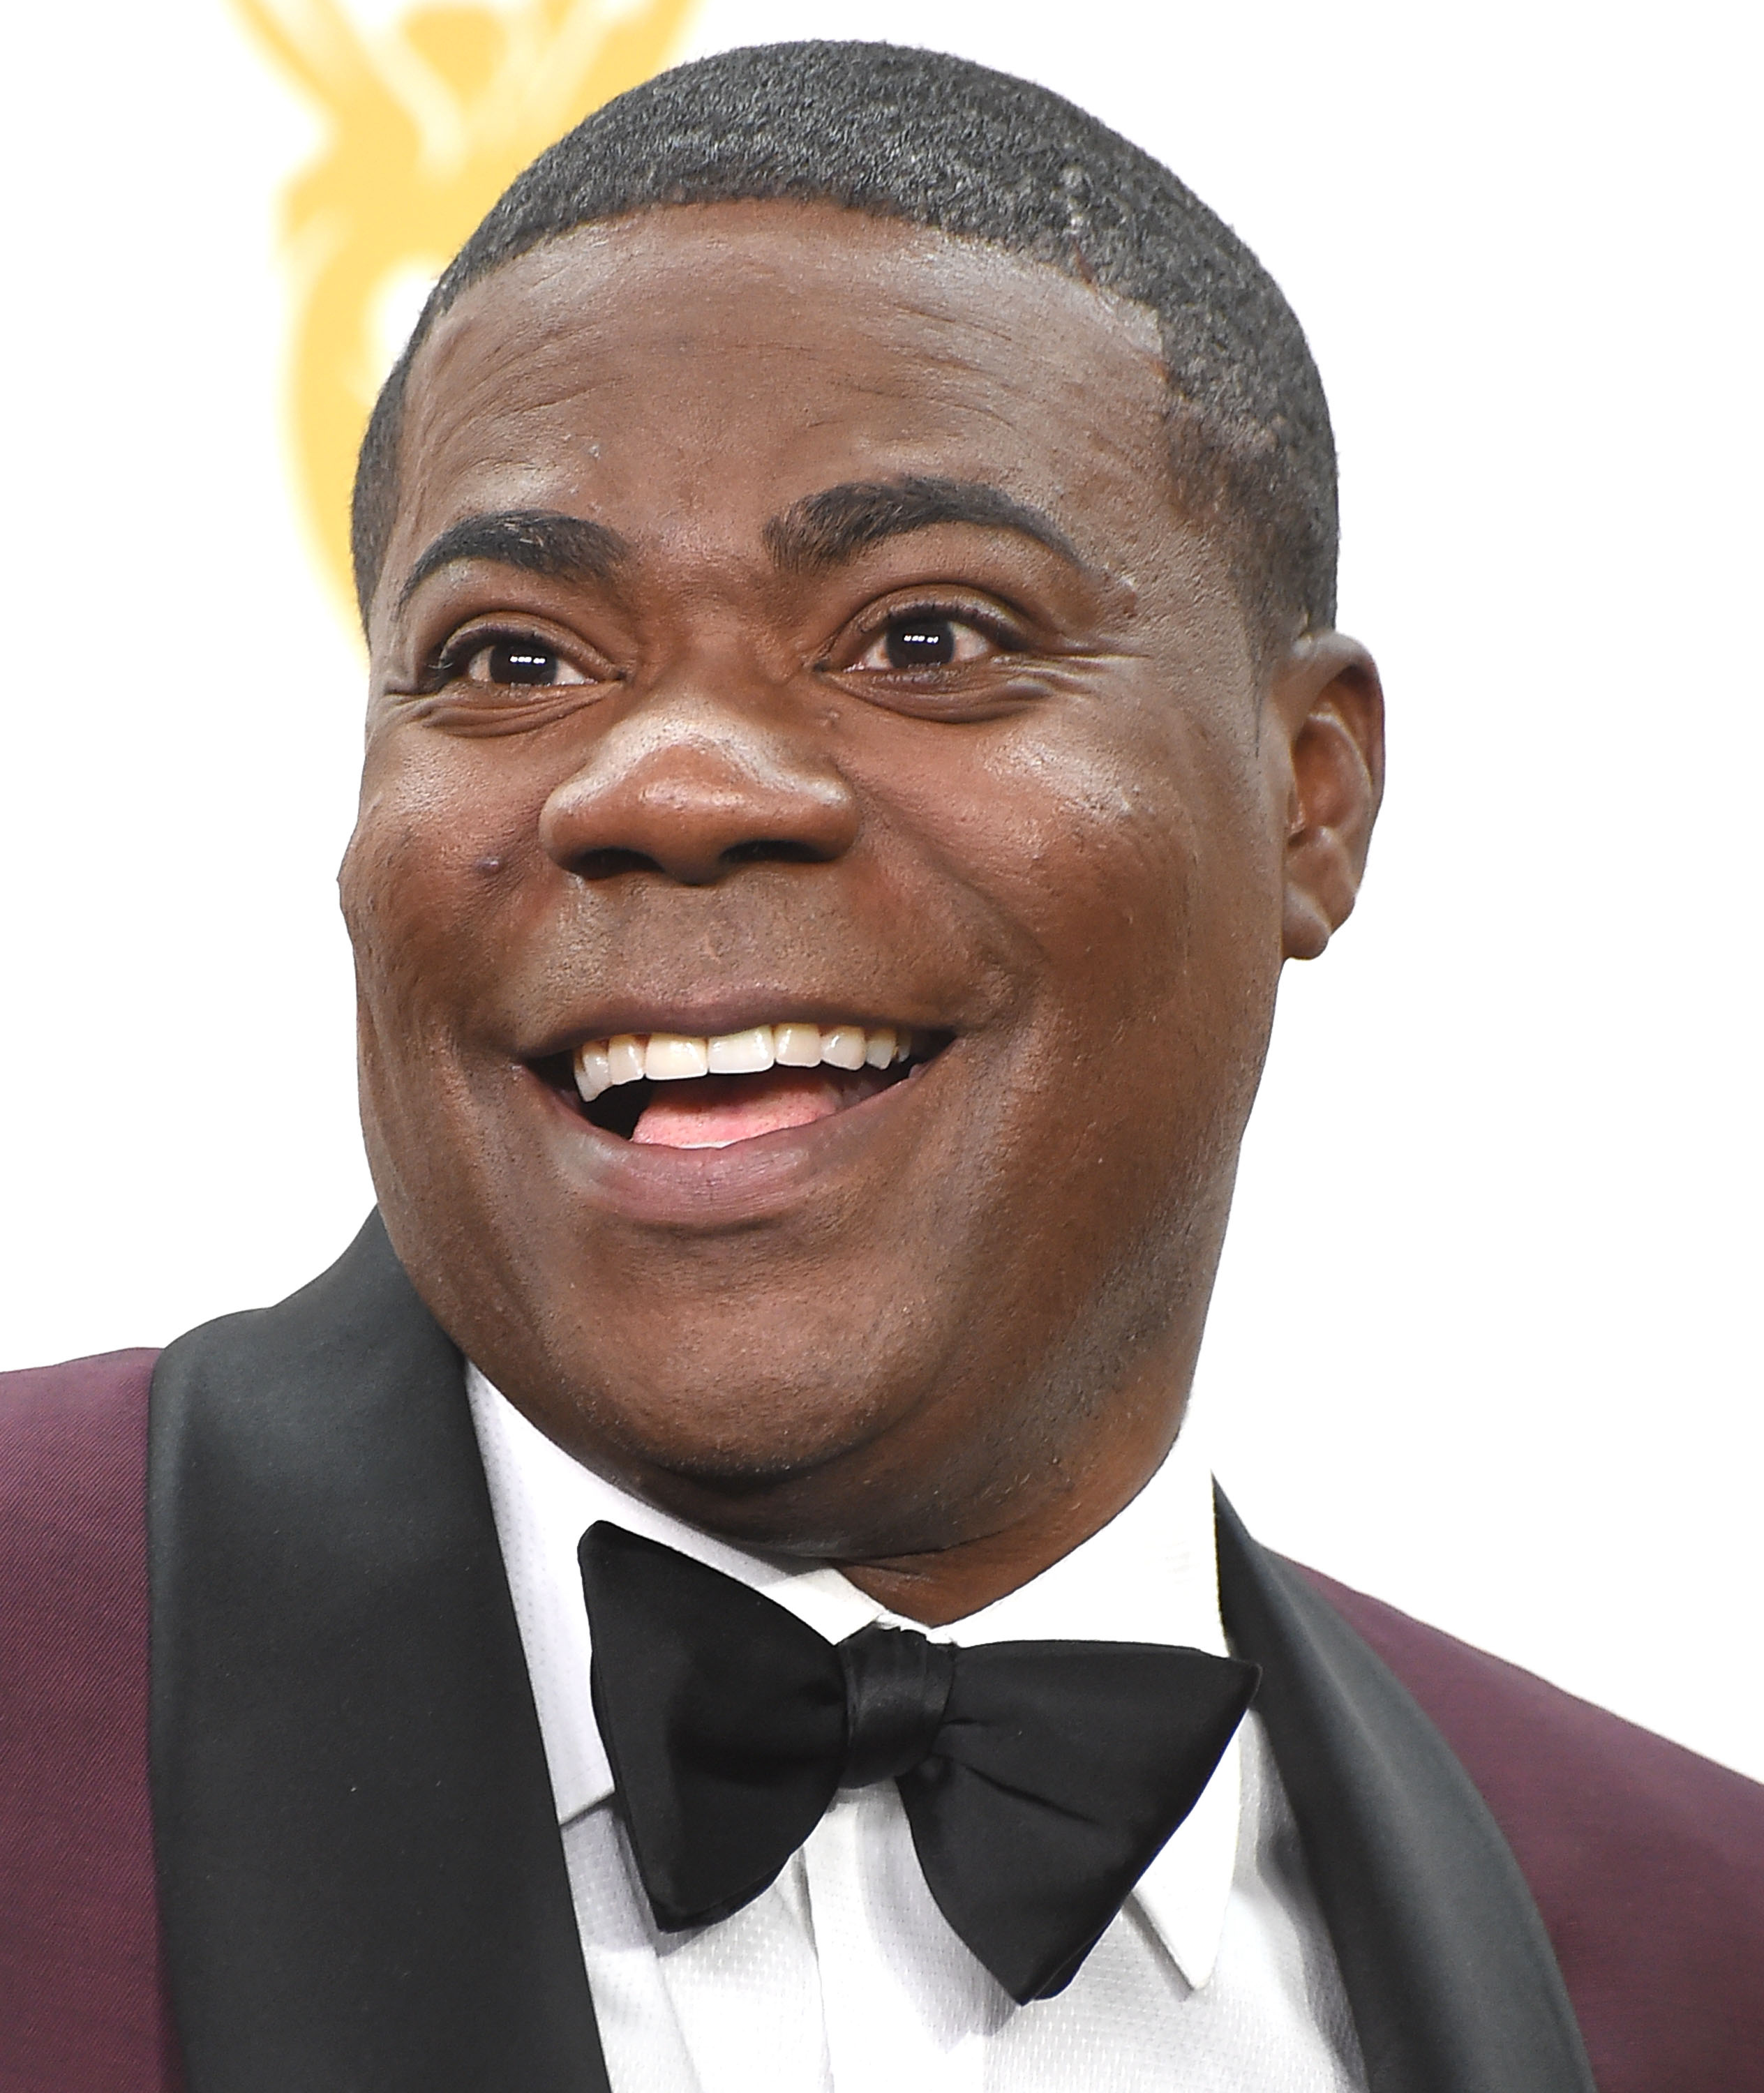 Tracy Morgan poses at the 67th Annual Primetime Emmy Awards